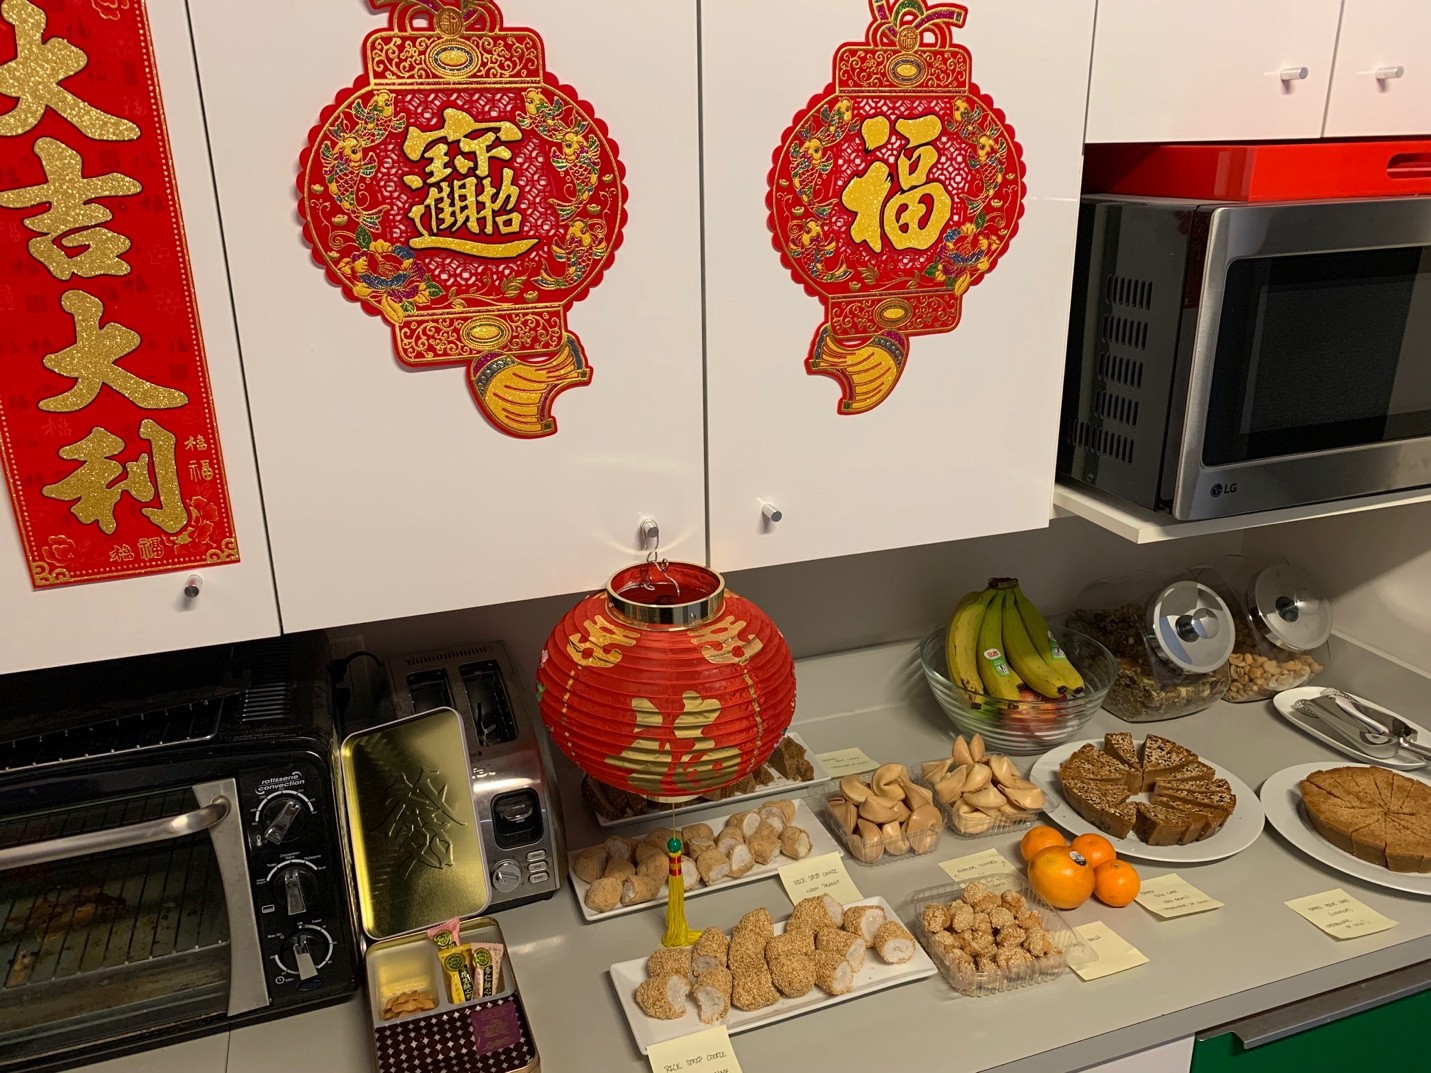 This is what we had on Chinese New Year. It is so special to me that Bellin celebrate Chinese New Year as I am Chinese and feel like I am at home.